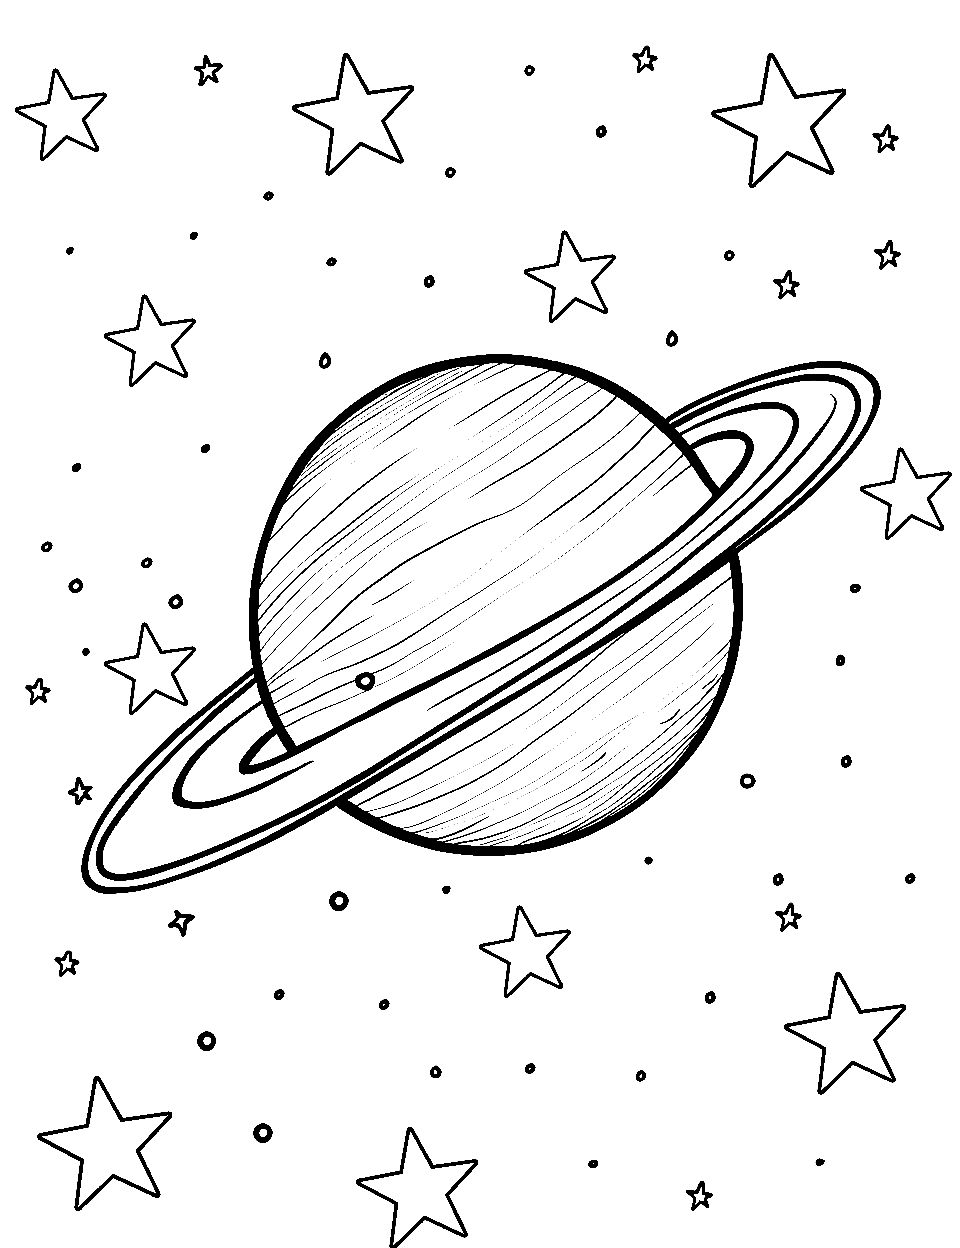 Saturn's Splendid Rings Coloring Page - A close-up of Saturn and its dazzling rings against a starry background.